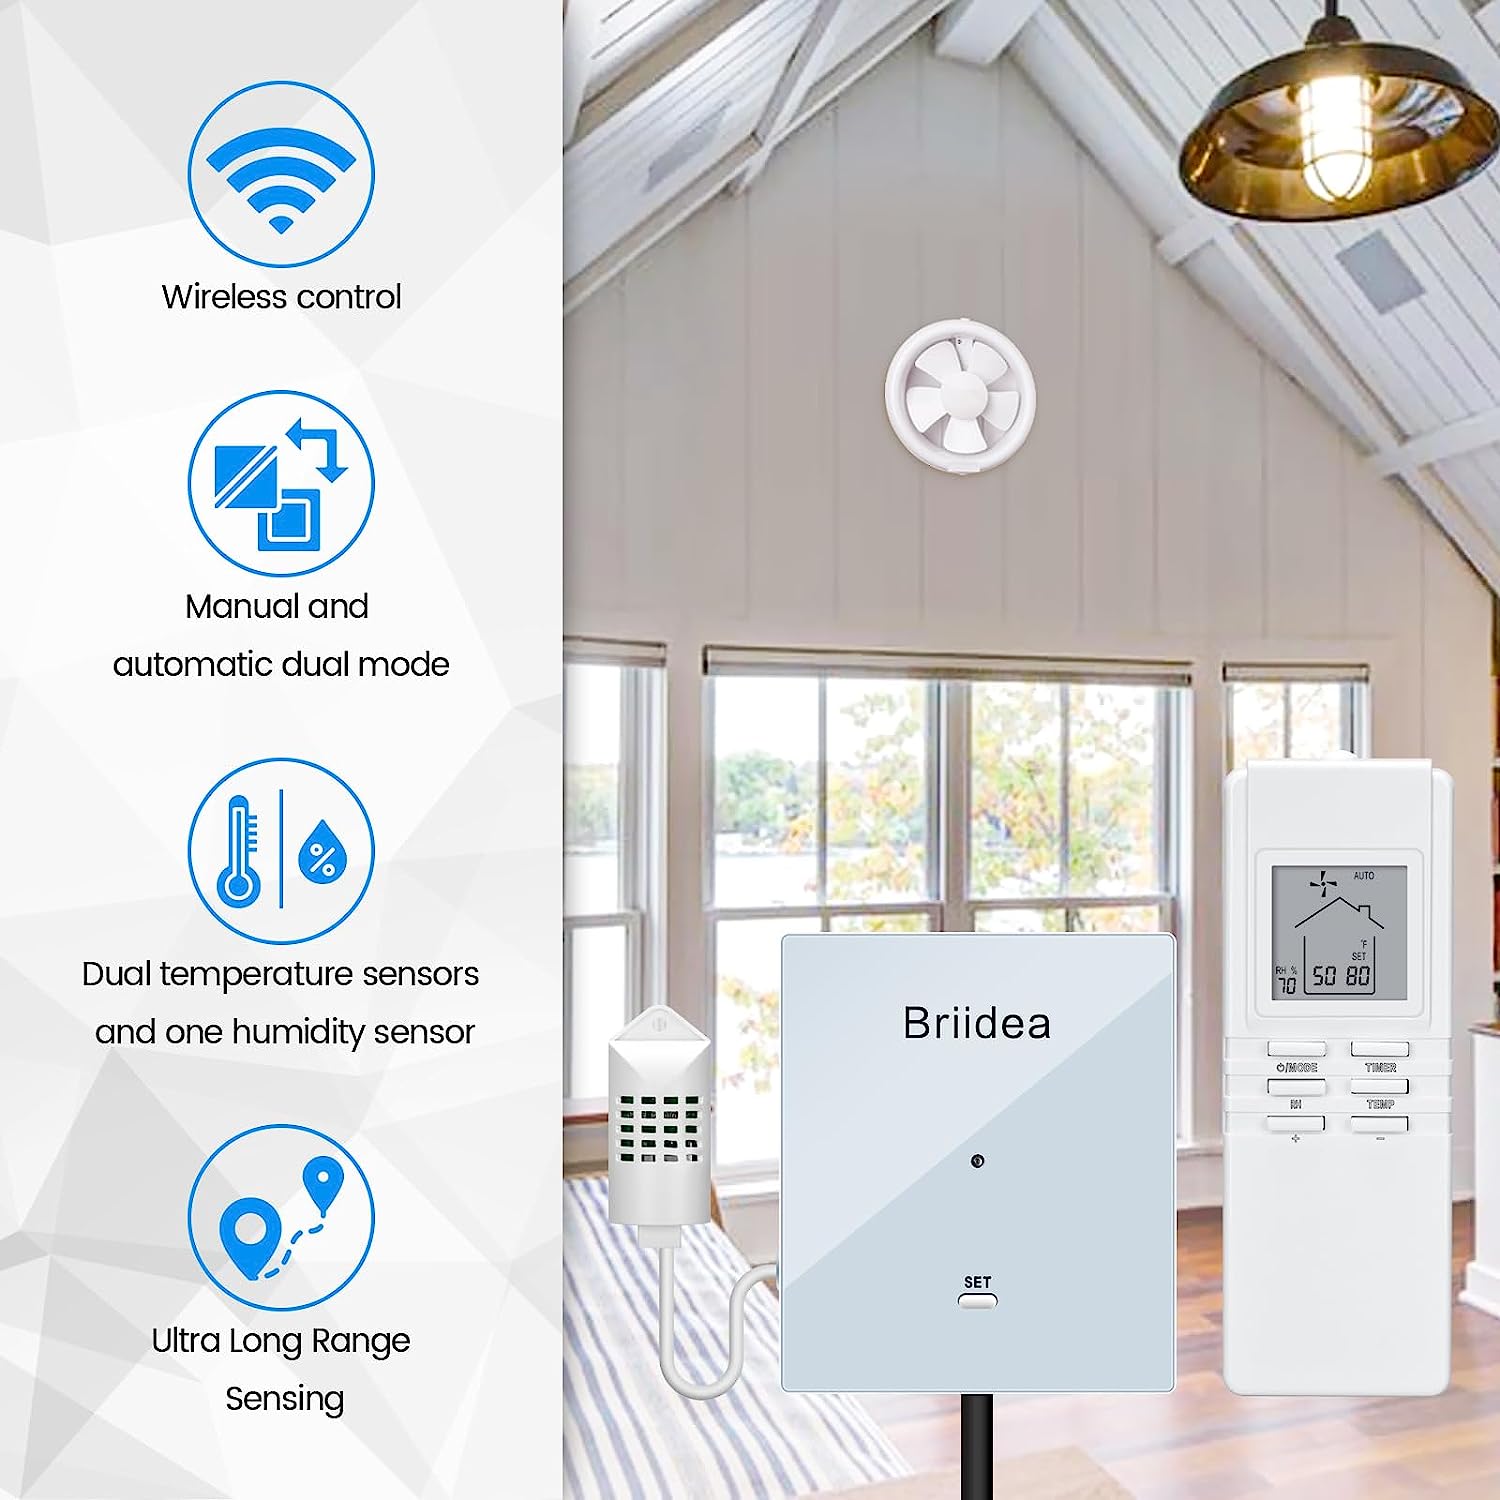 briidea Exhaust Fan Remote Control Kit, Attic Fan Thermostat Control Kit with Temperature & Humidity Sensor for Achieving a Cool and Dry Attic, Easily Convert Your Hardwired Fans to Smart Fans